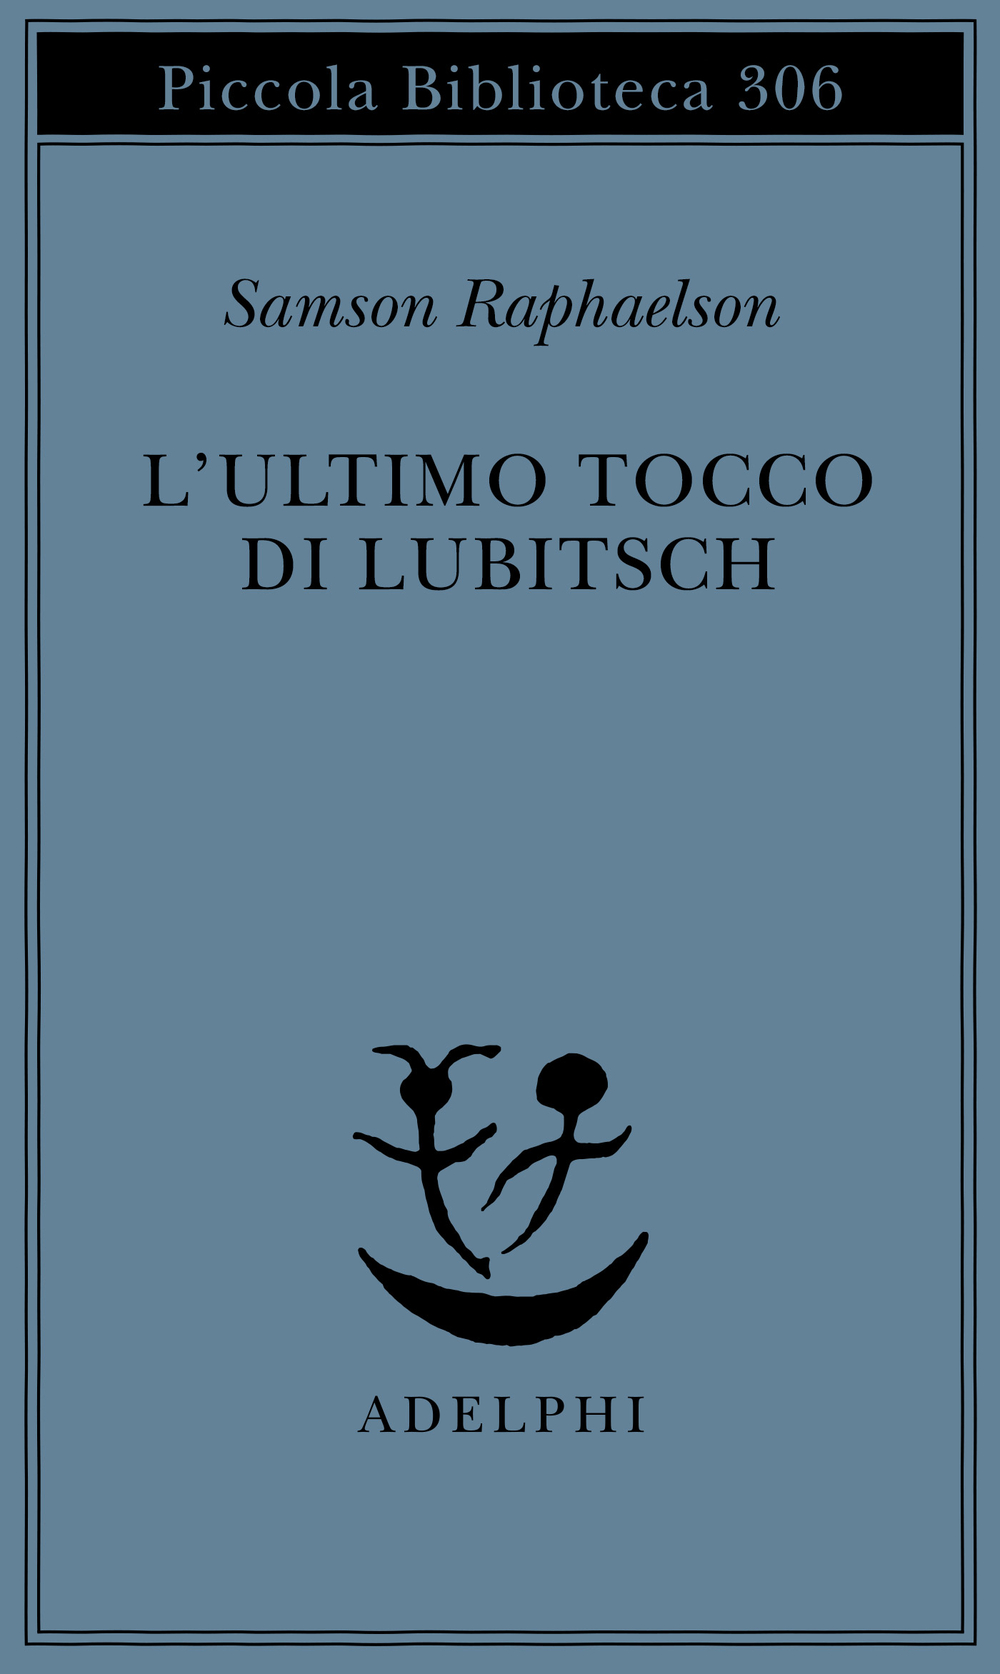 L'ultimo tocco di Lubitsch - Samson Raphaelson